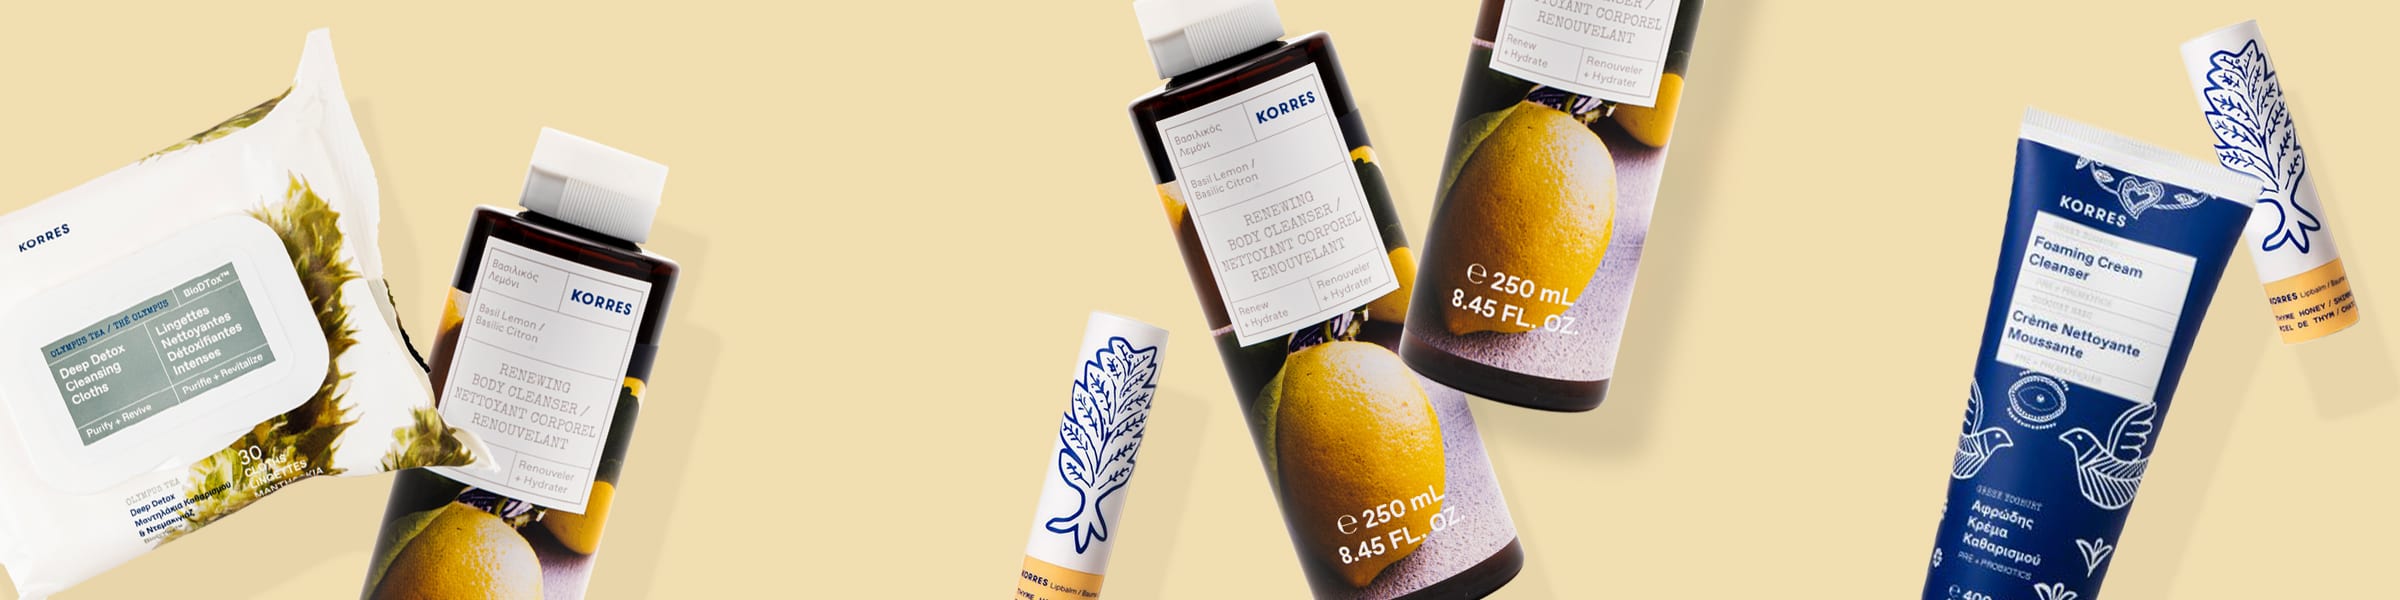 Korres Case Study - Natural Products